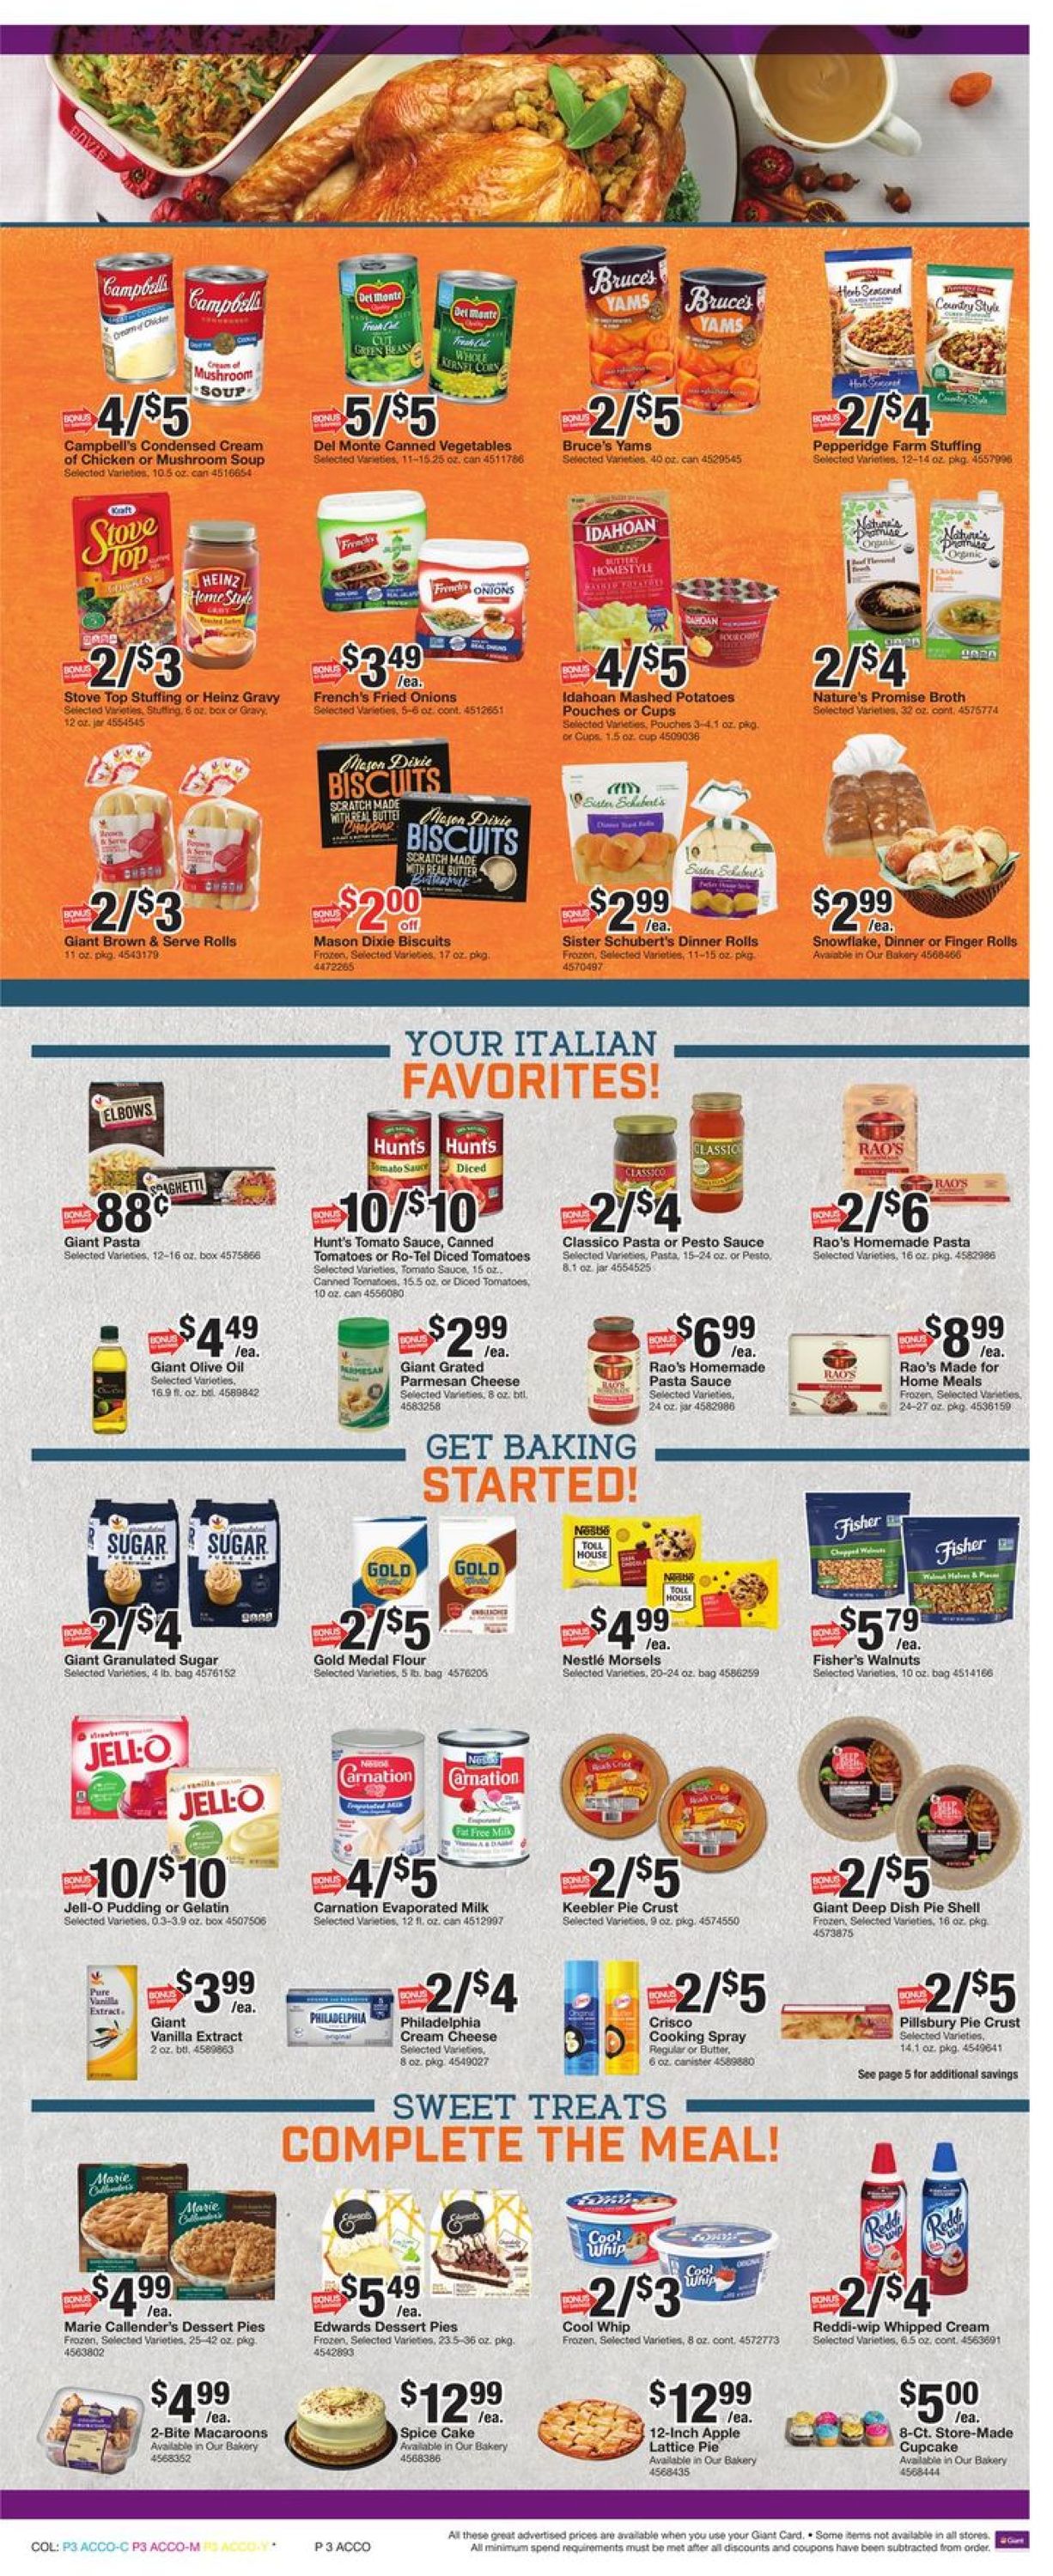 Giant Food Thanksgiving 2020 Weekly Ad Circular - valid 11/20-11/26/2020 (Page 6)